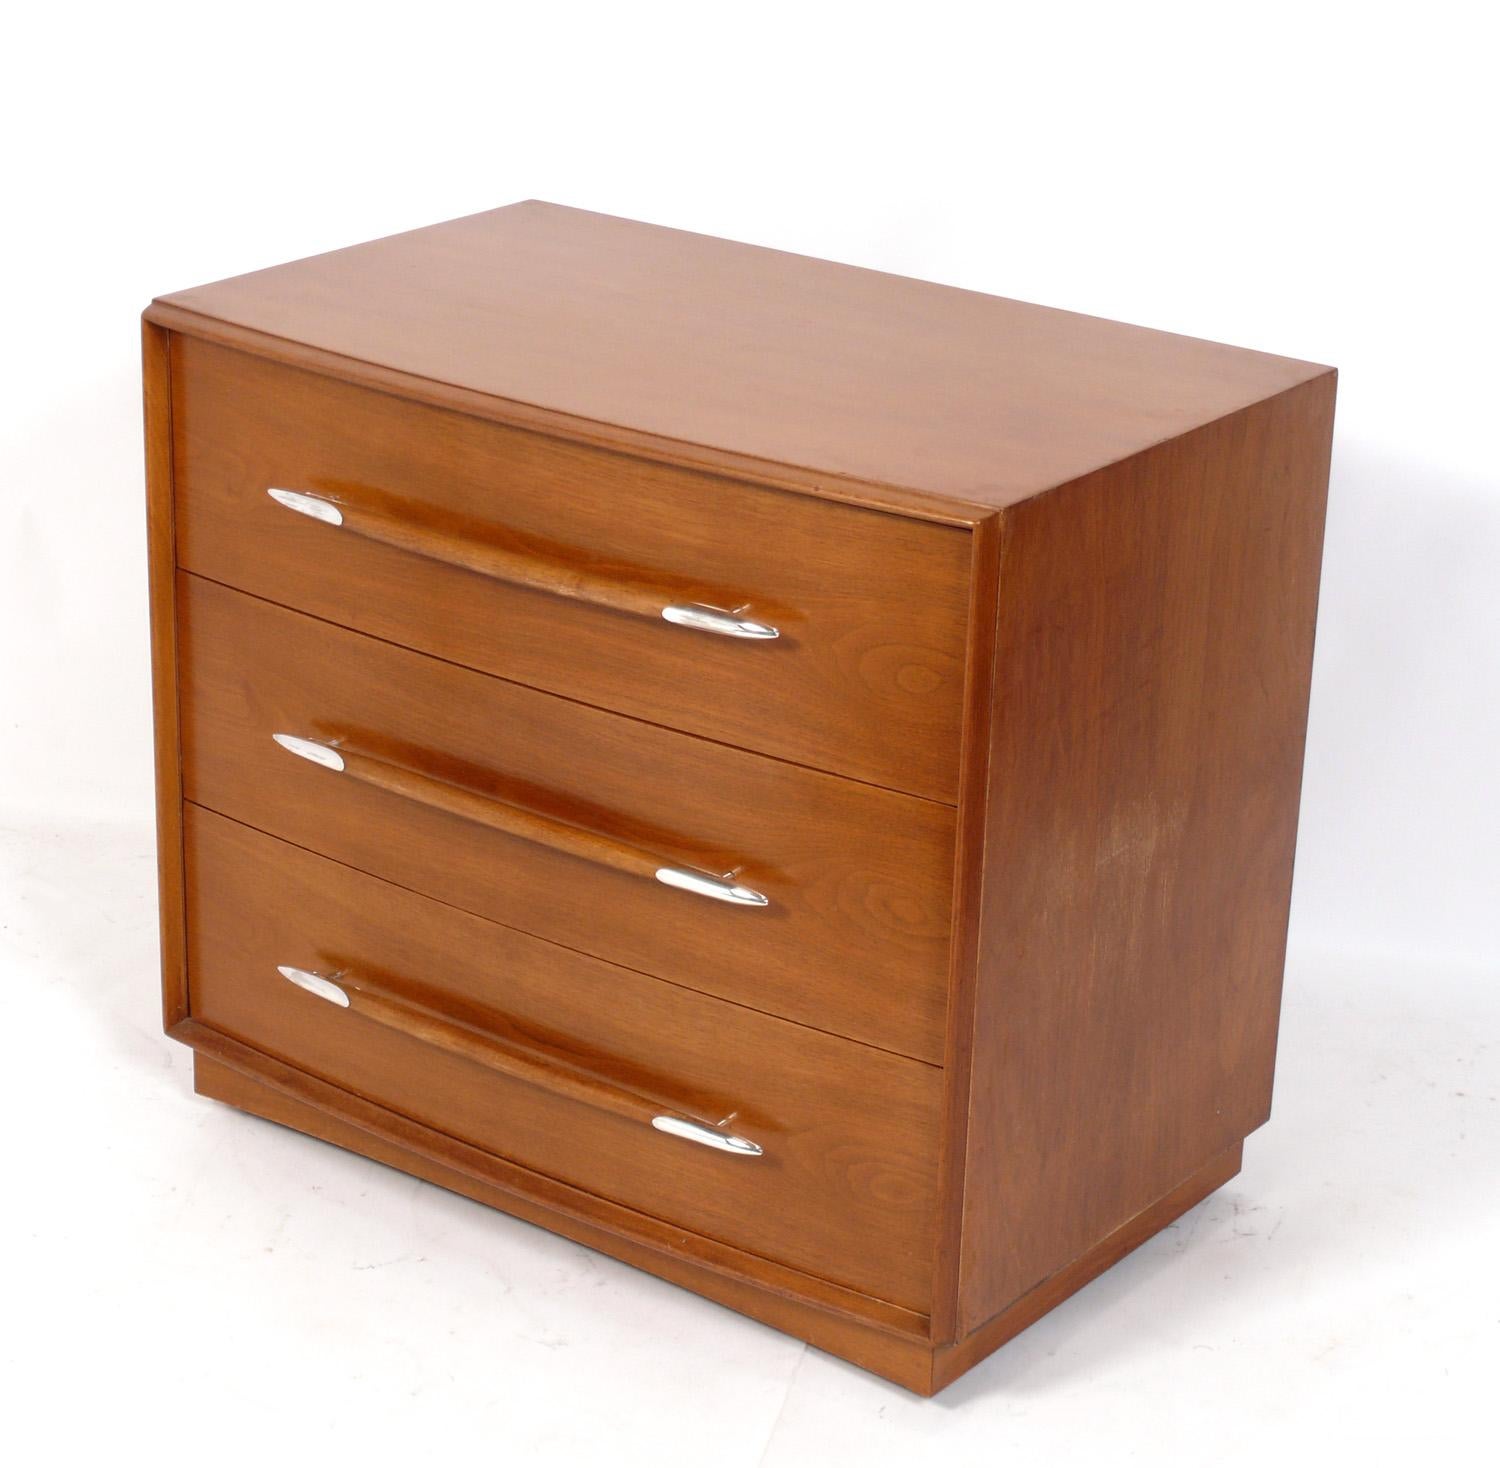 Elegant Modern chest or dresser, designed by T.H. Robsjohn Gibbings for Widdicomb, American, circa 1950s. This chest is currently being refinished and can be completed in your choice of color(including the original color as shown). The price noted